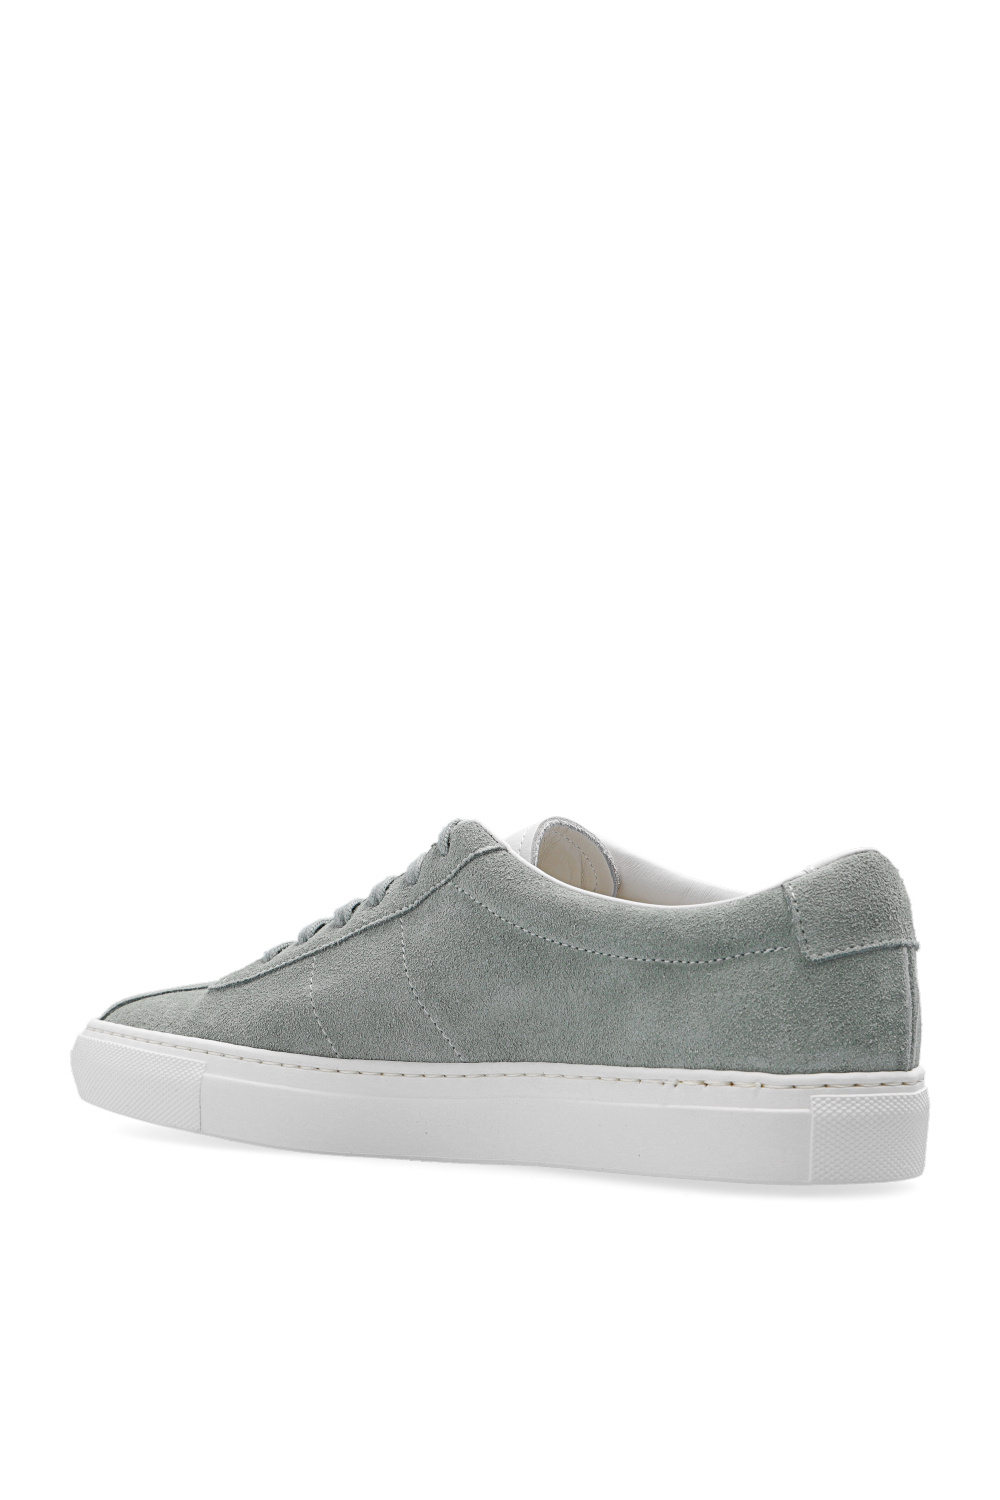 Common Projects ‘Summer Edition’ sneakers